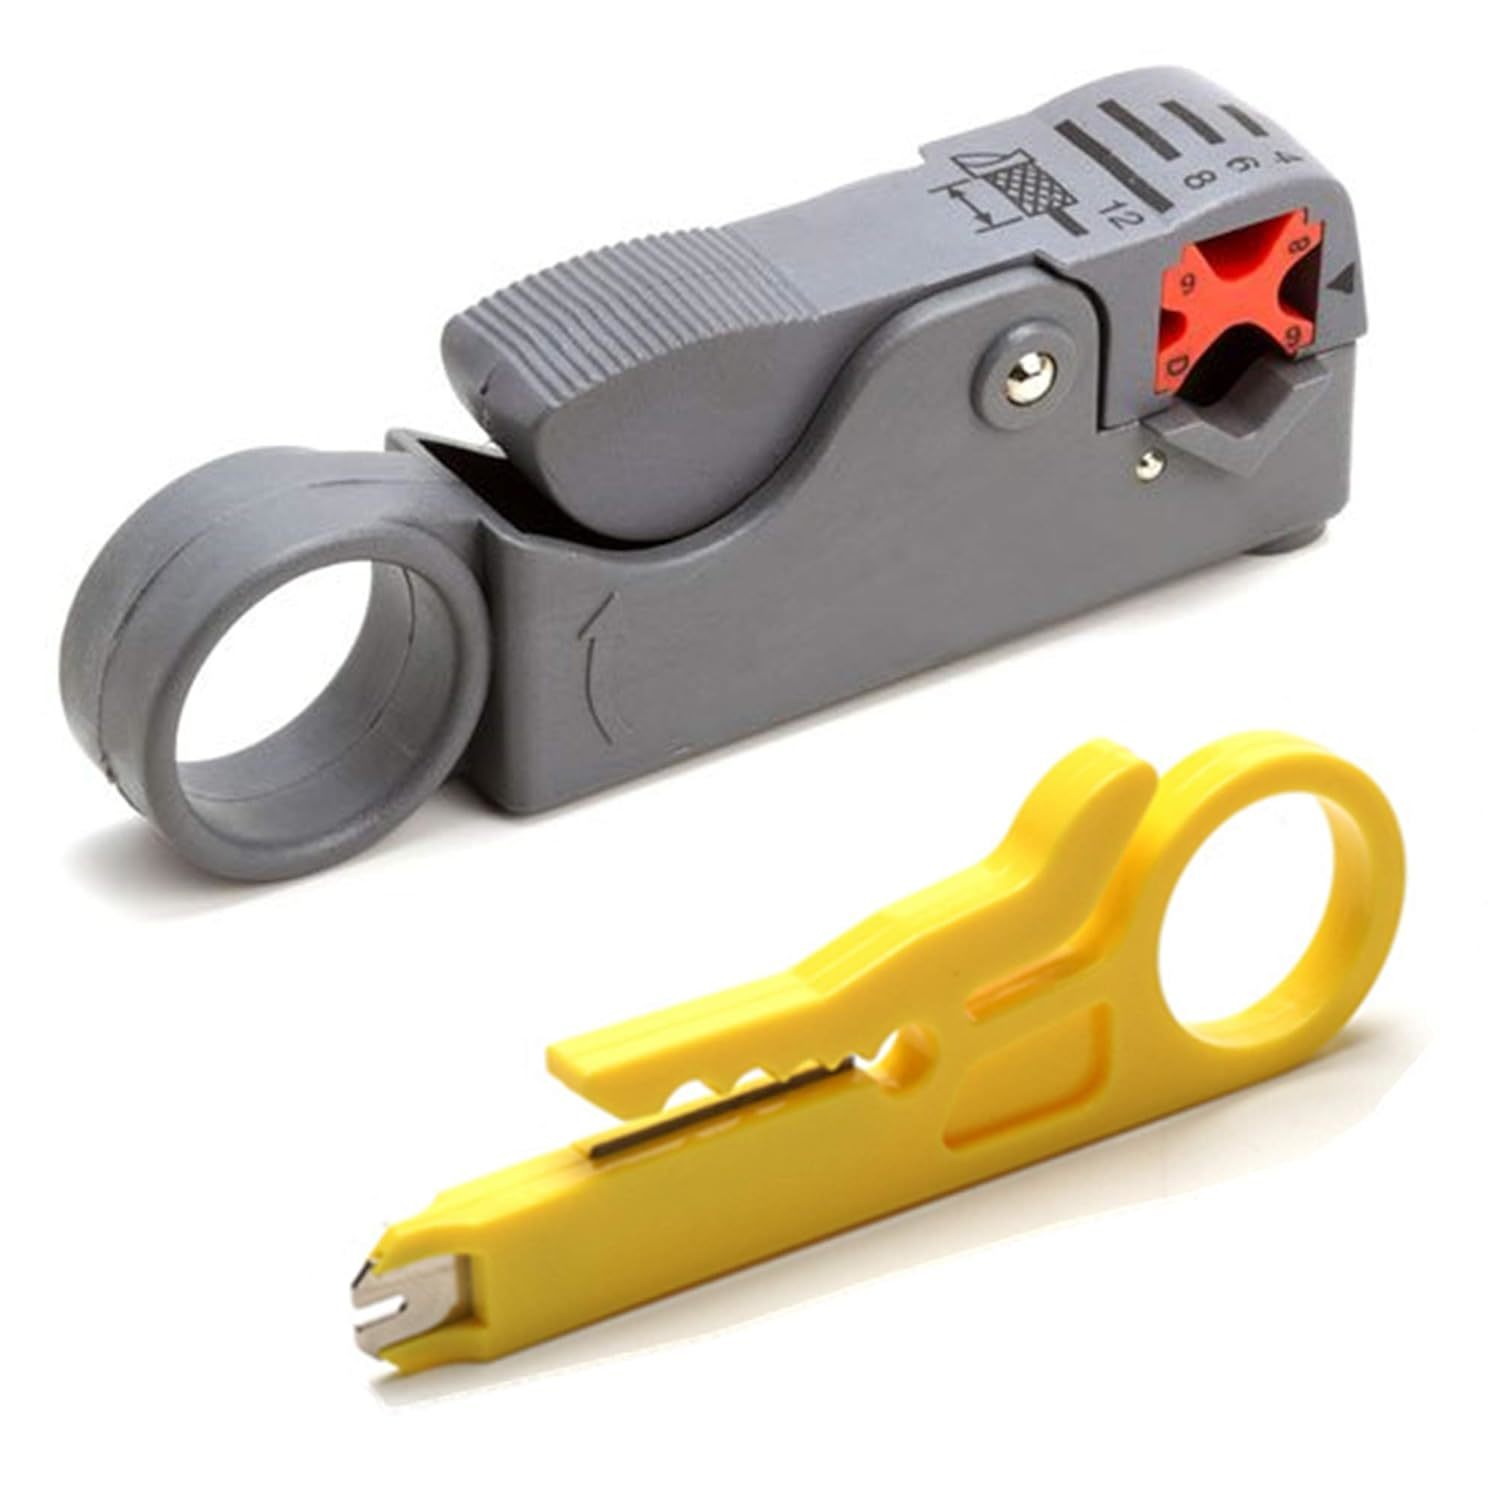 Wire Stripper Coaxial Cable Stripper Wire Cutter For Rg-58, Rg-59, Rg-6, Rg-8X,  - $19.99